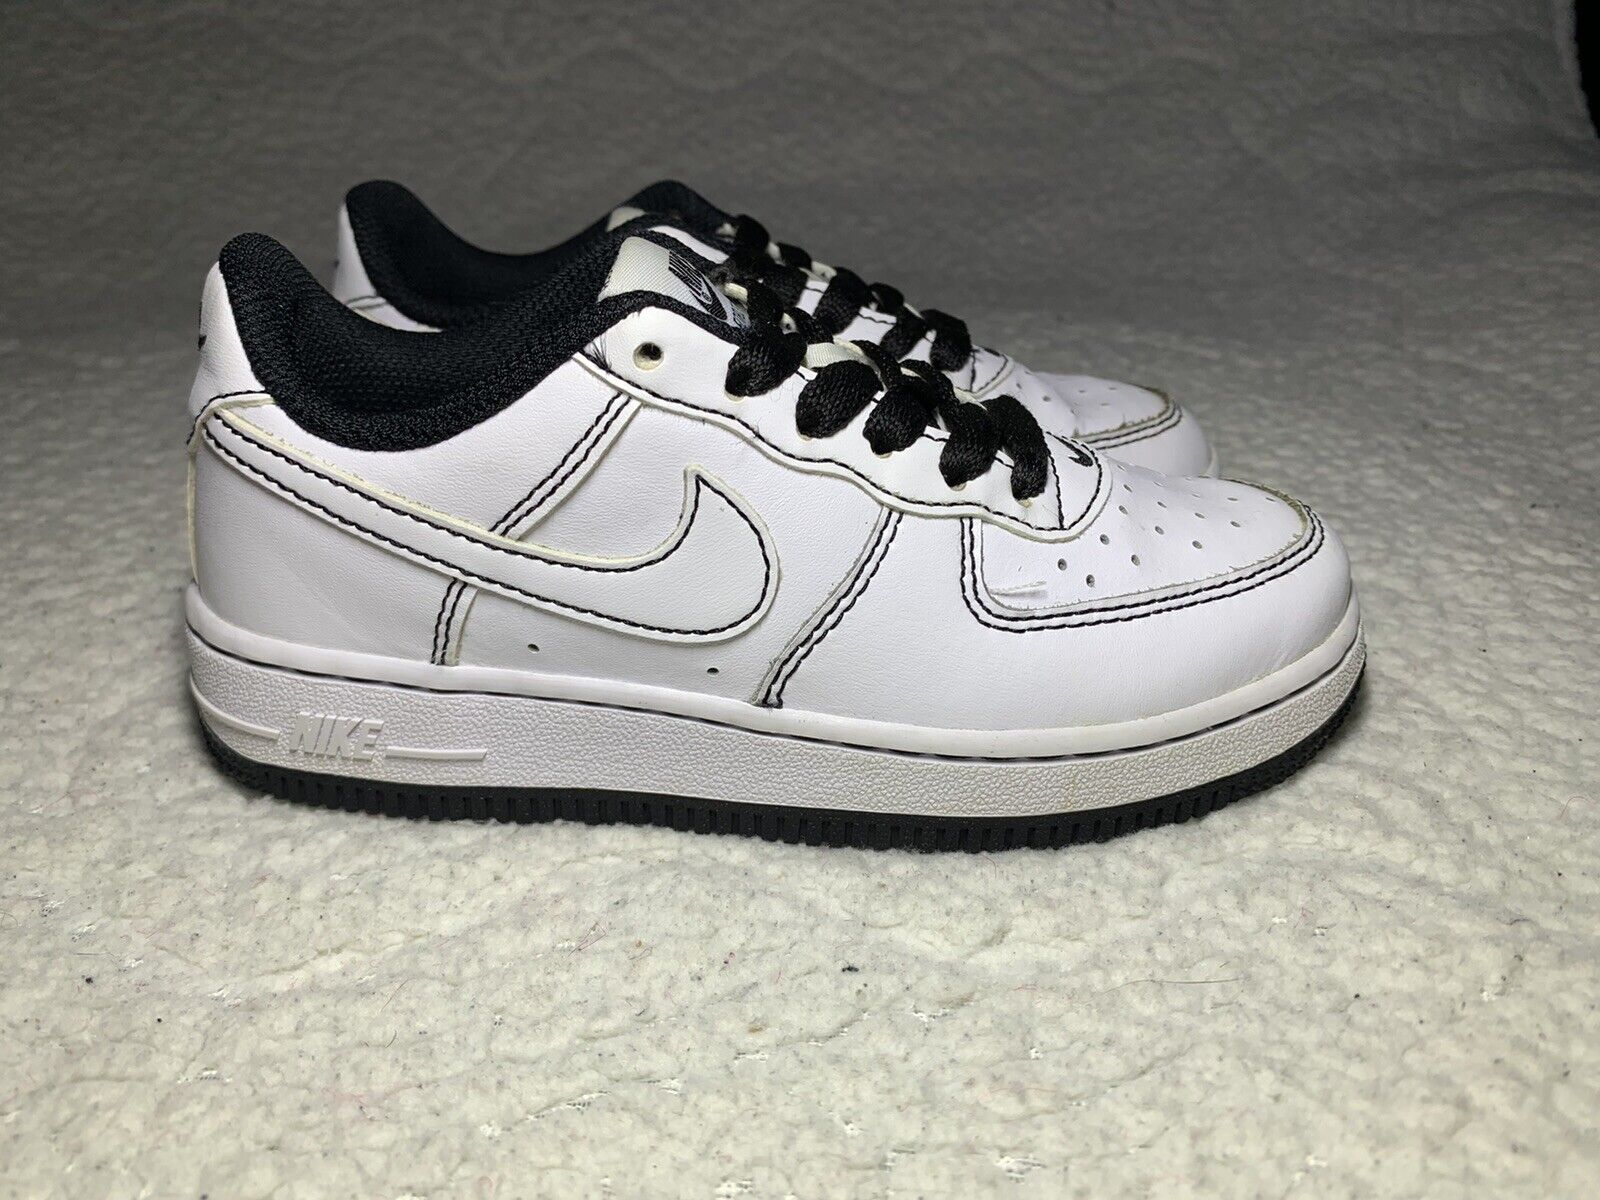 Nike Air Force 1 Low 07 Shoes Contrast Stitch White Black (PS